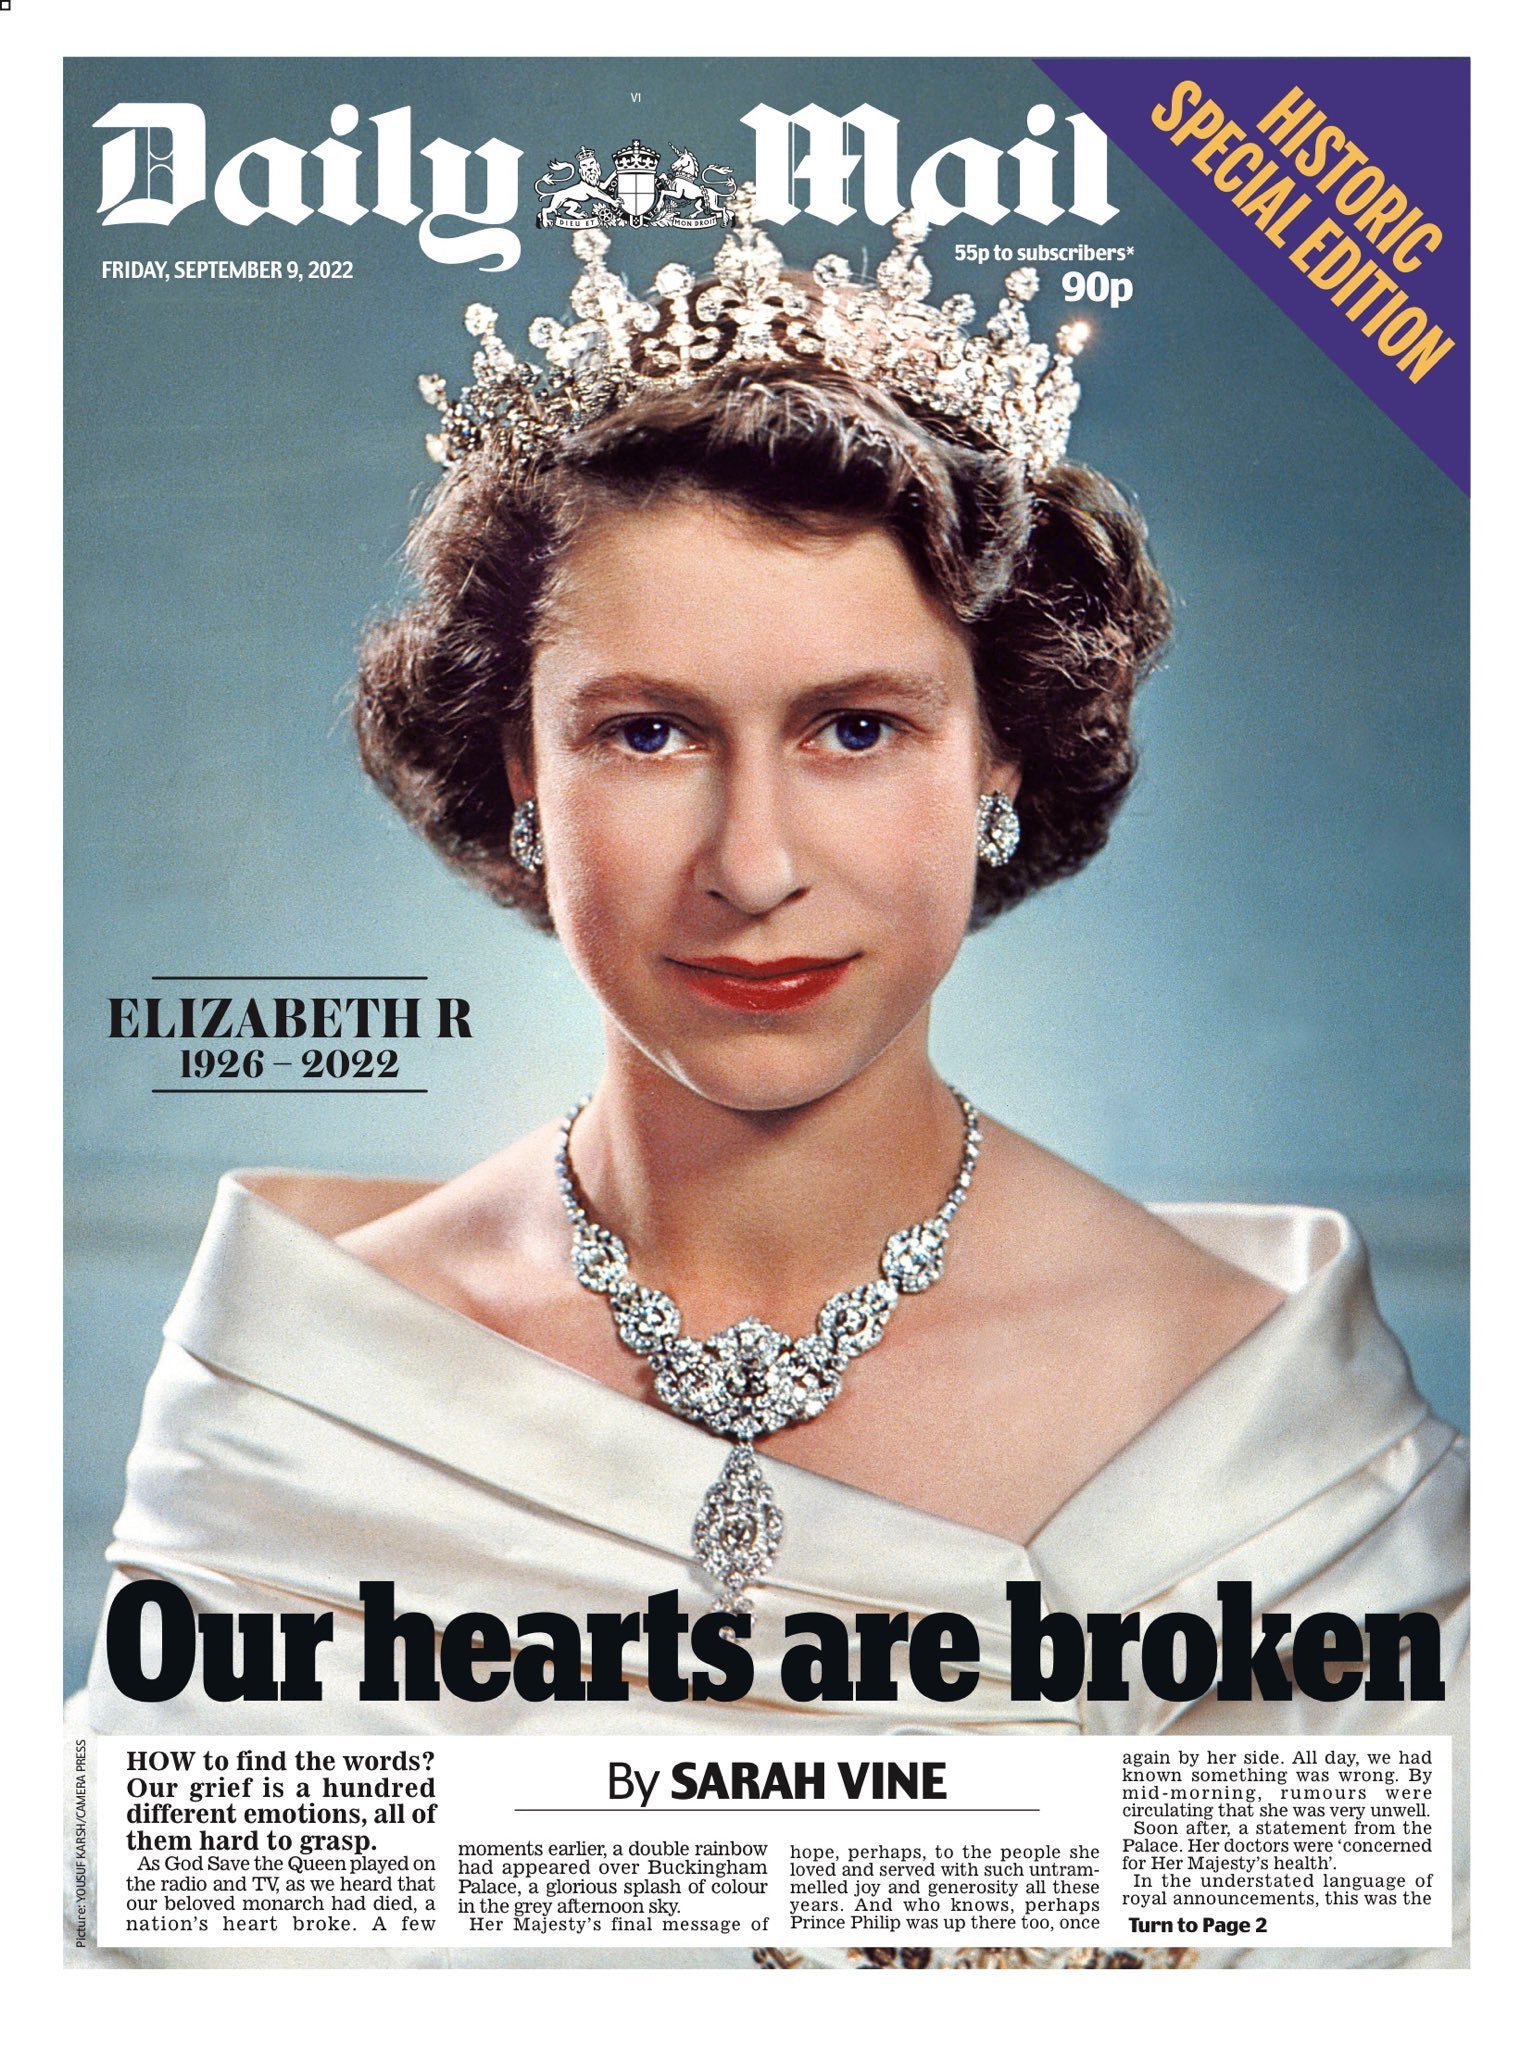 Daily Mail Newspaper - 9th September 2022 - Queen Elizabeth II 1926-2022  Tribute